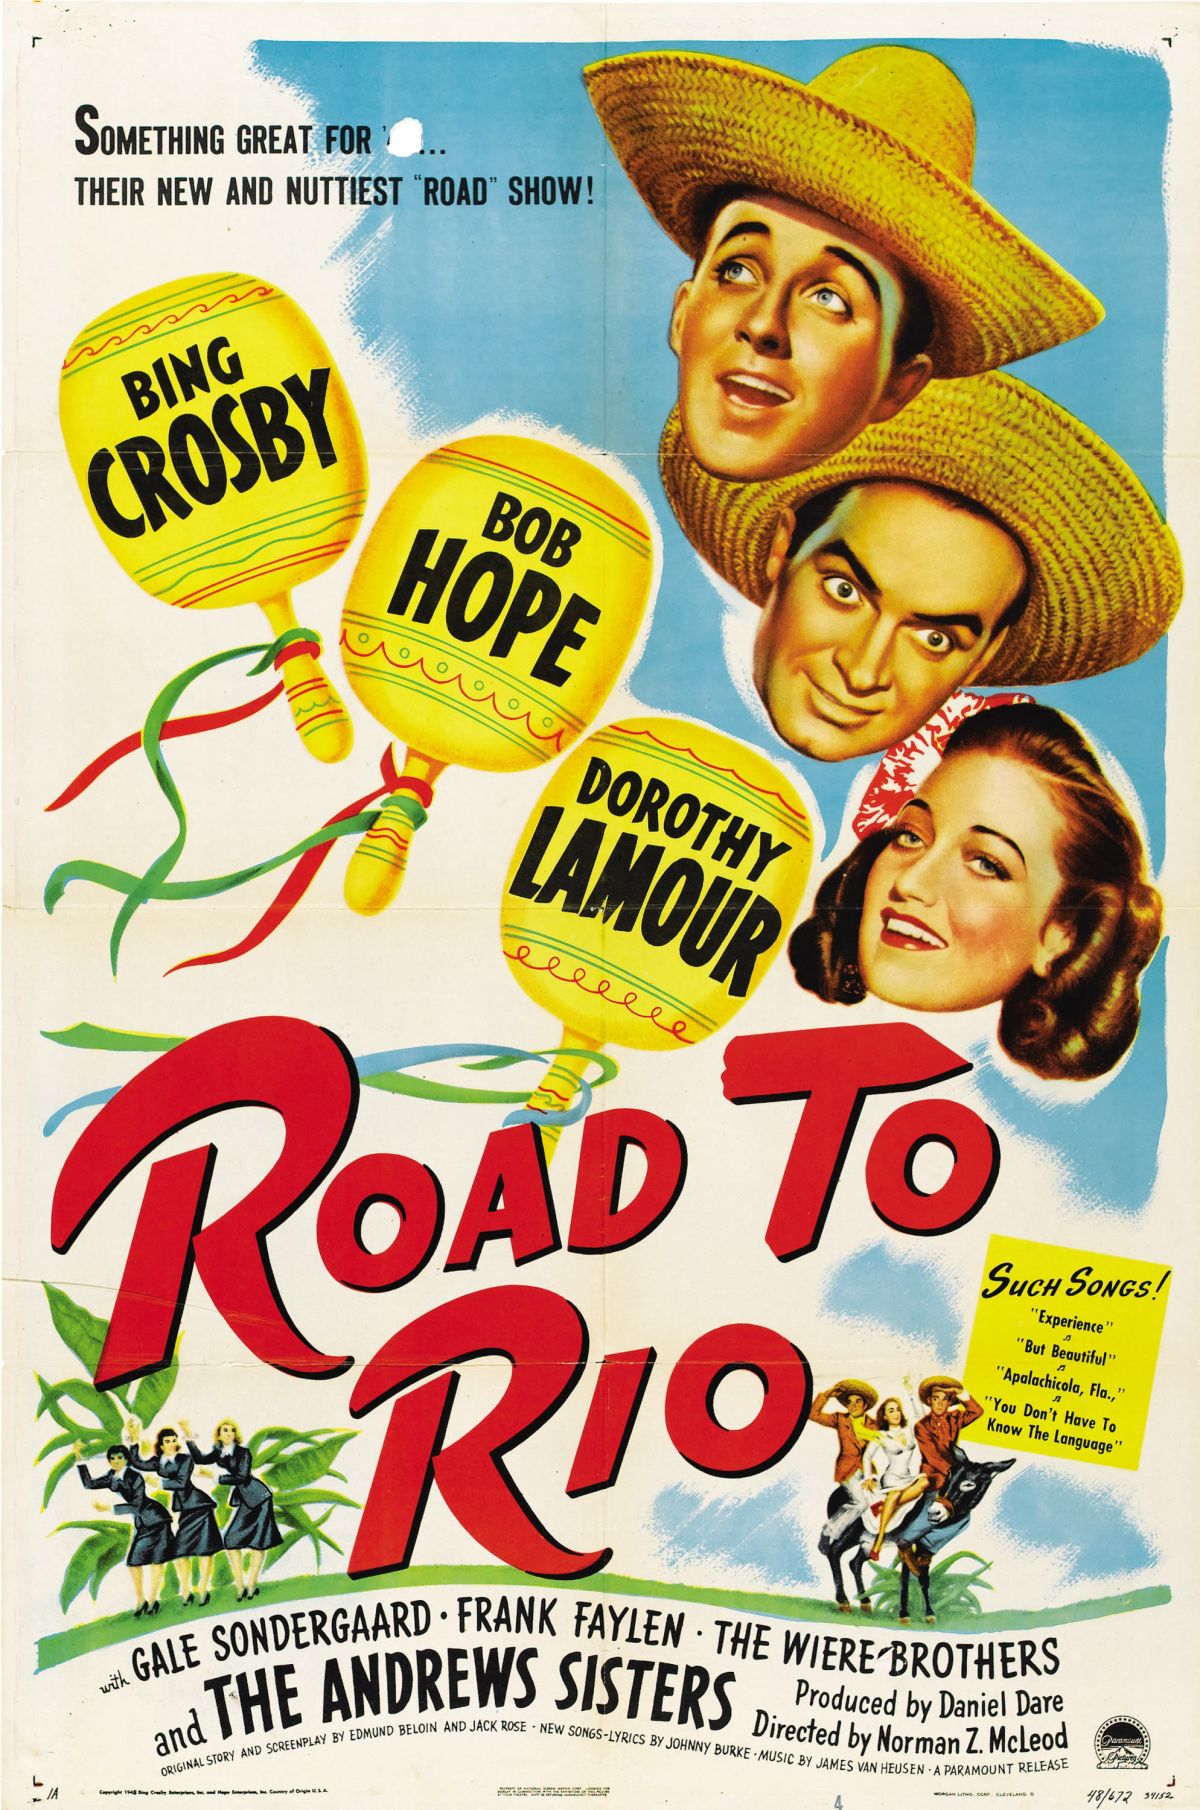 Pepito’s Filmography: “Road to Rio” Starring Bing Crosby, Bob Hope & Dorothy Lamour (1947)